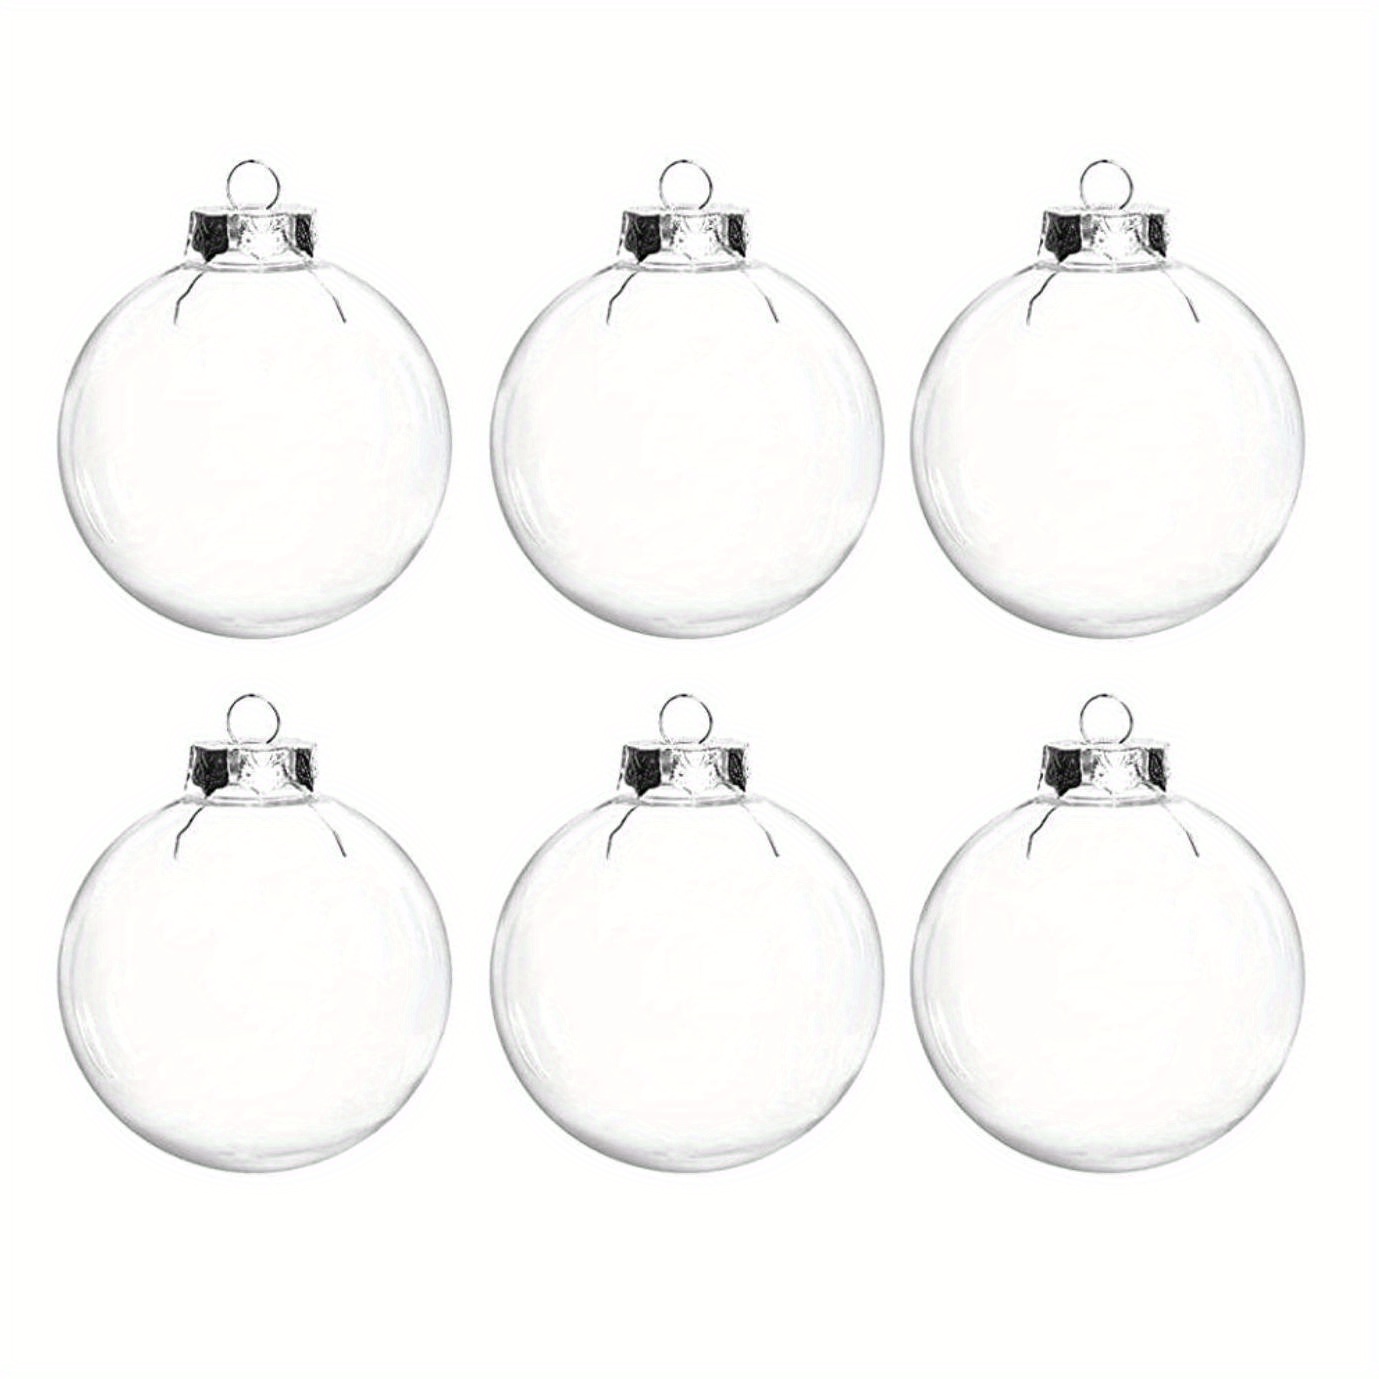  Clear Glass Ball Ornaments (3.15inch/80 mm, 12 Set of), Large  Clear Glass Ornaments for Crafts Fillable, Hanging Ornaments Christmas Tree  Decor Holiday Decorative Craft Tree Ornaments : Home & Kitchen